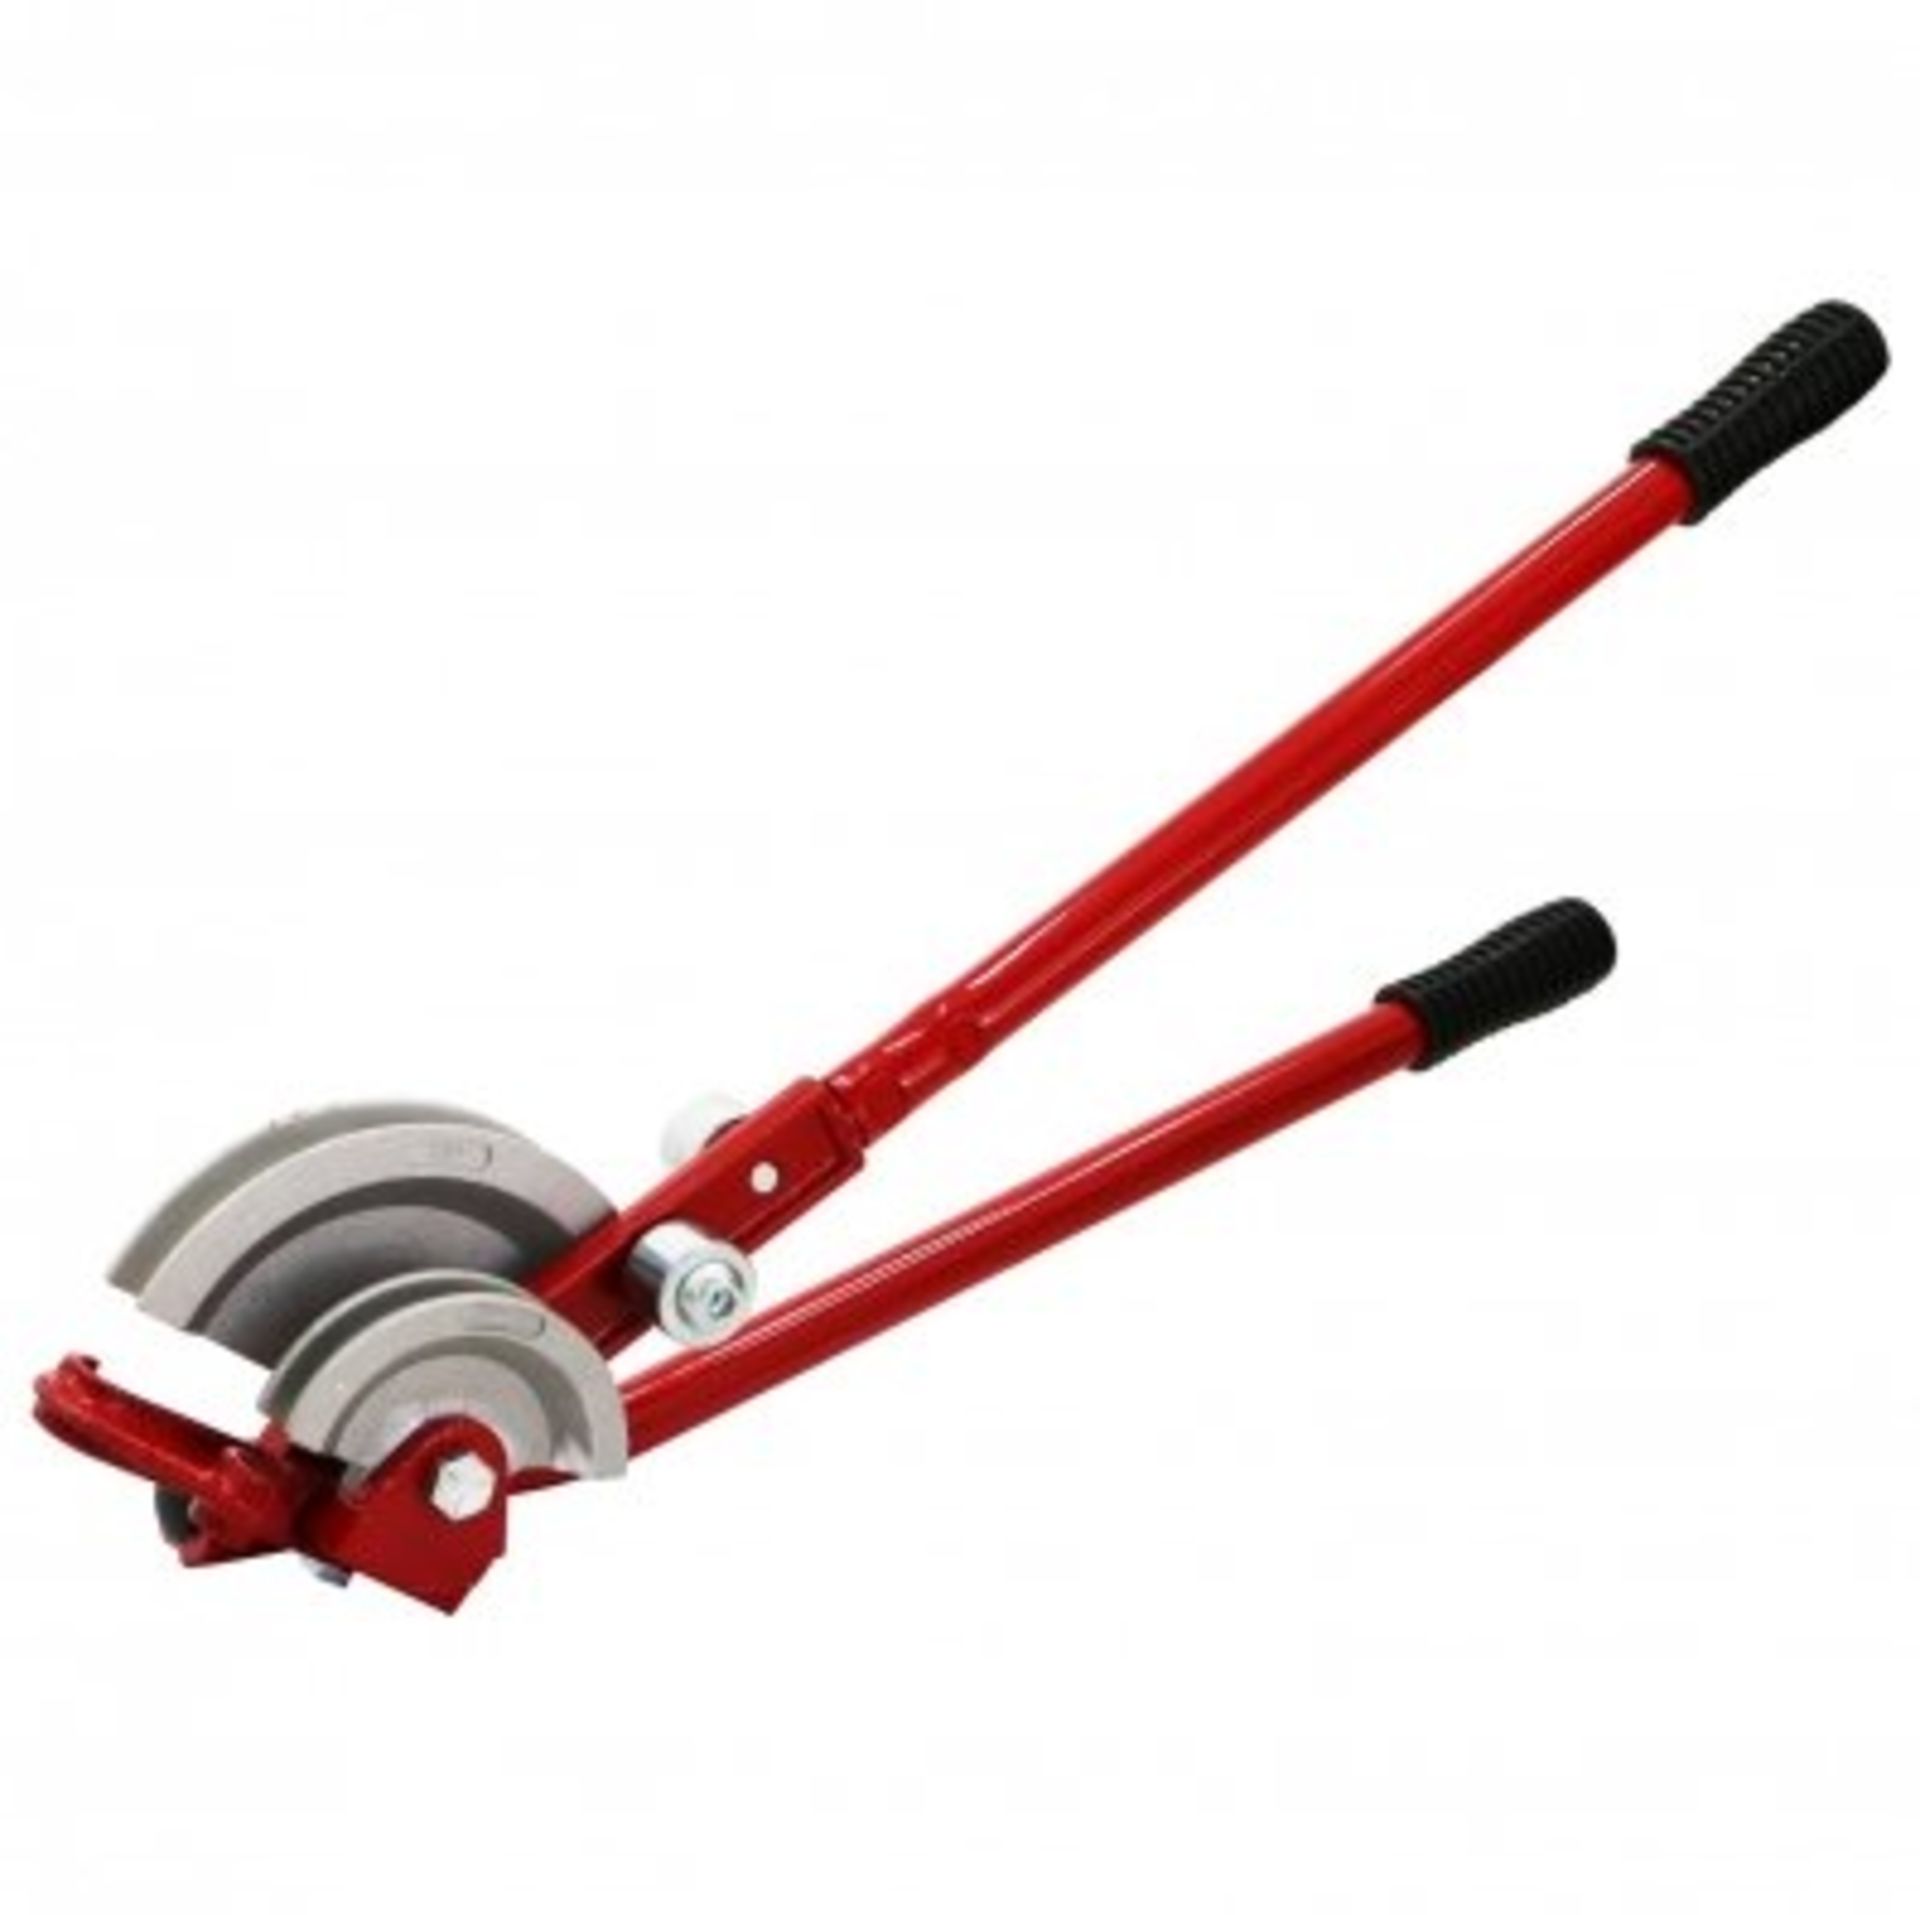 (RL56) Heavy Duty Plumbers Pipe Bender Tool With 15mm and 22mm Formes Our professional heavy...